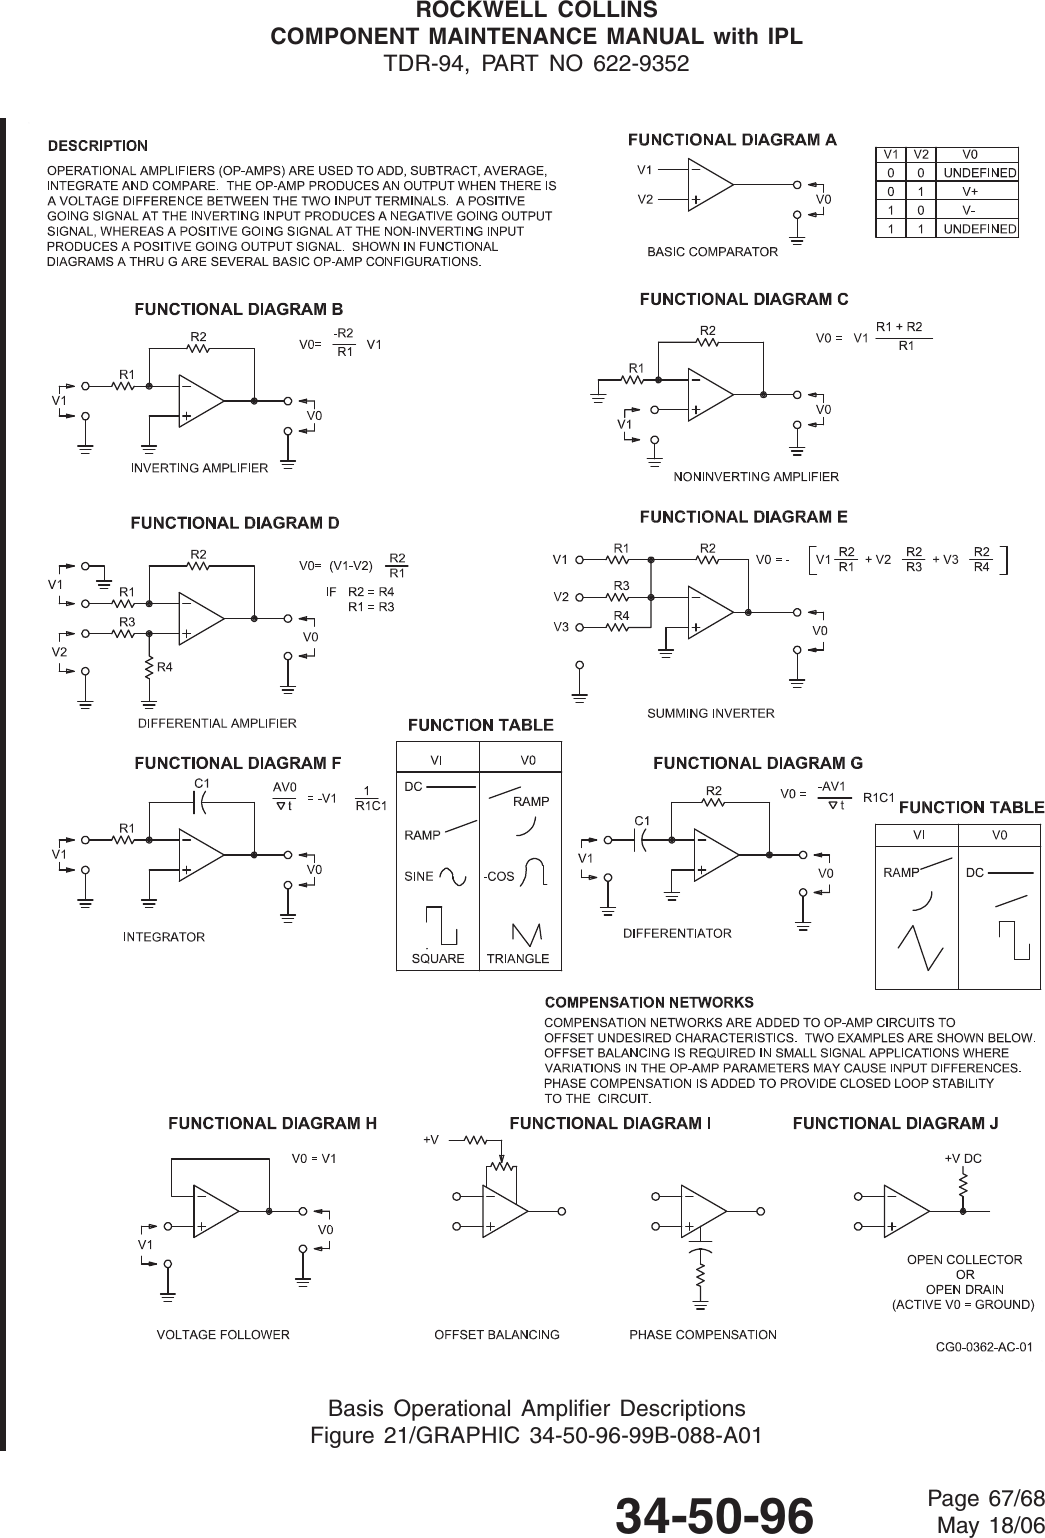 ROCKWELL COLLINSCOMPONENT MAINTENANCE MANUAL with IPLTDR-94, PART NO 622-9352Basis Operational Amplifier DescriptionsFigure 21/GRAPHIC 34-50-96-99B-088-A0134-50-96 Page 67/68May 18/06